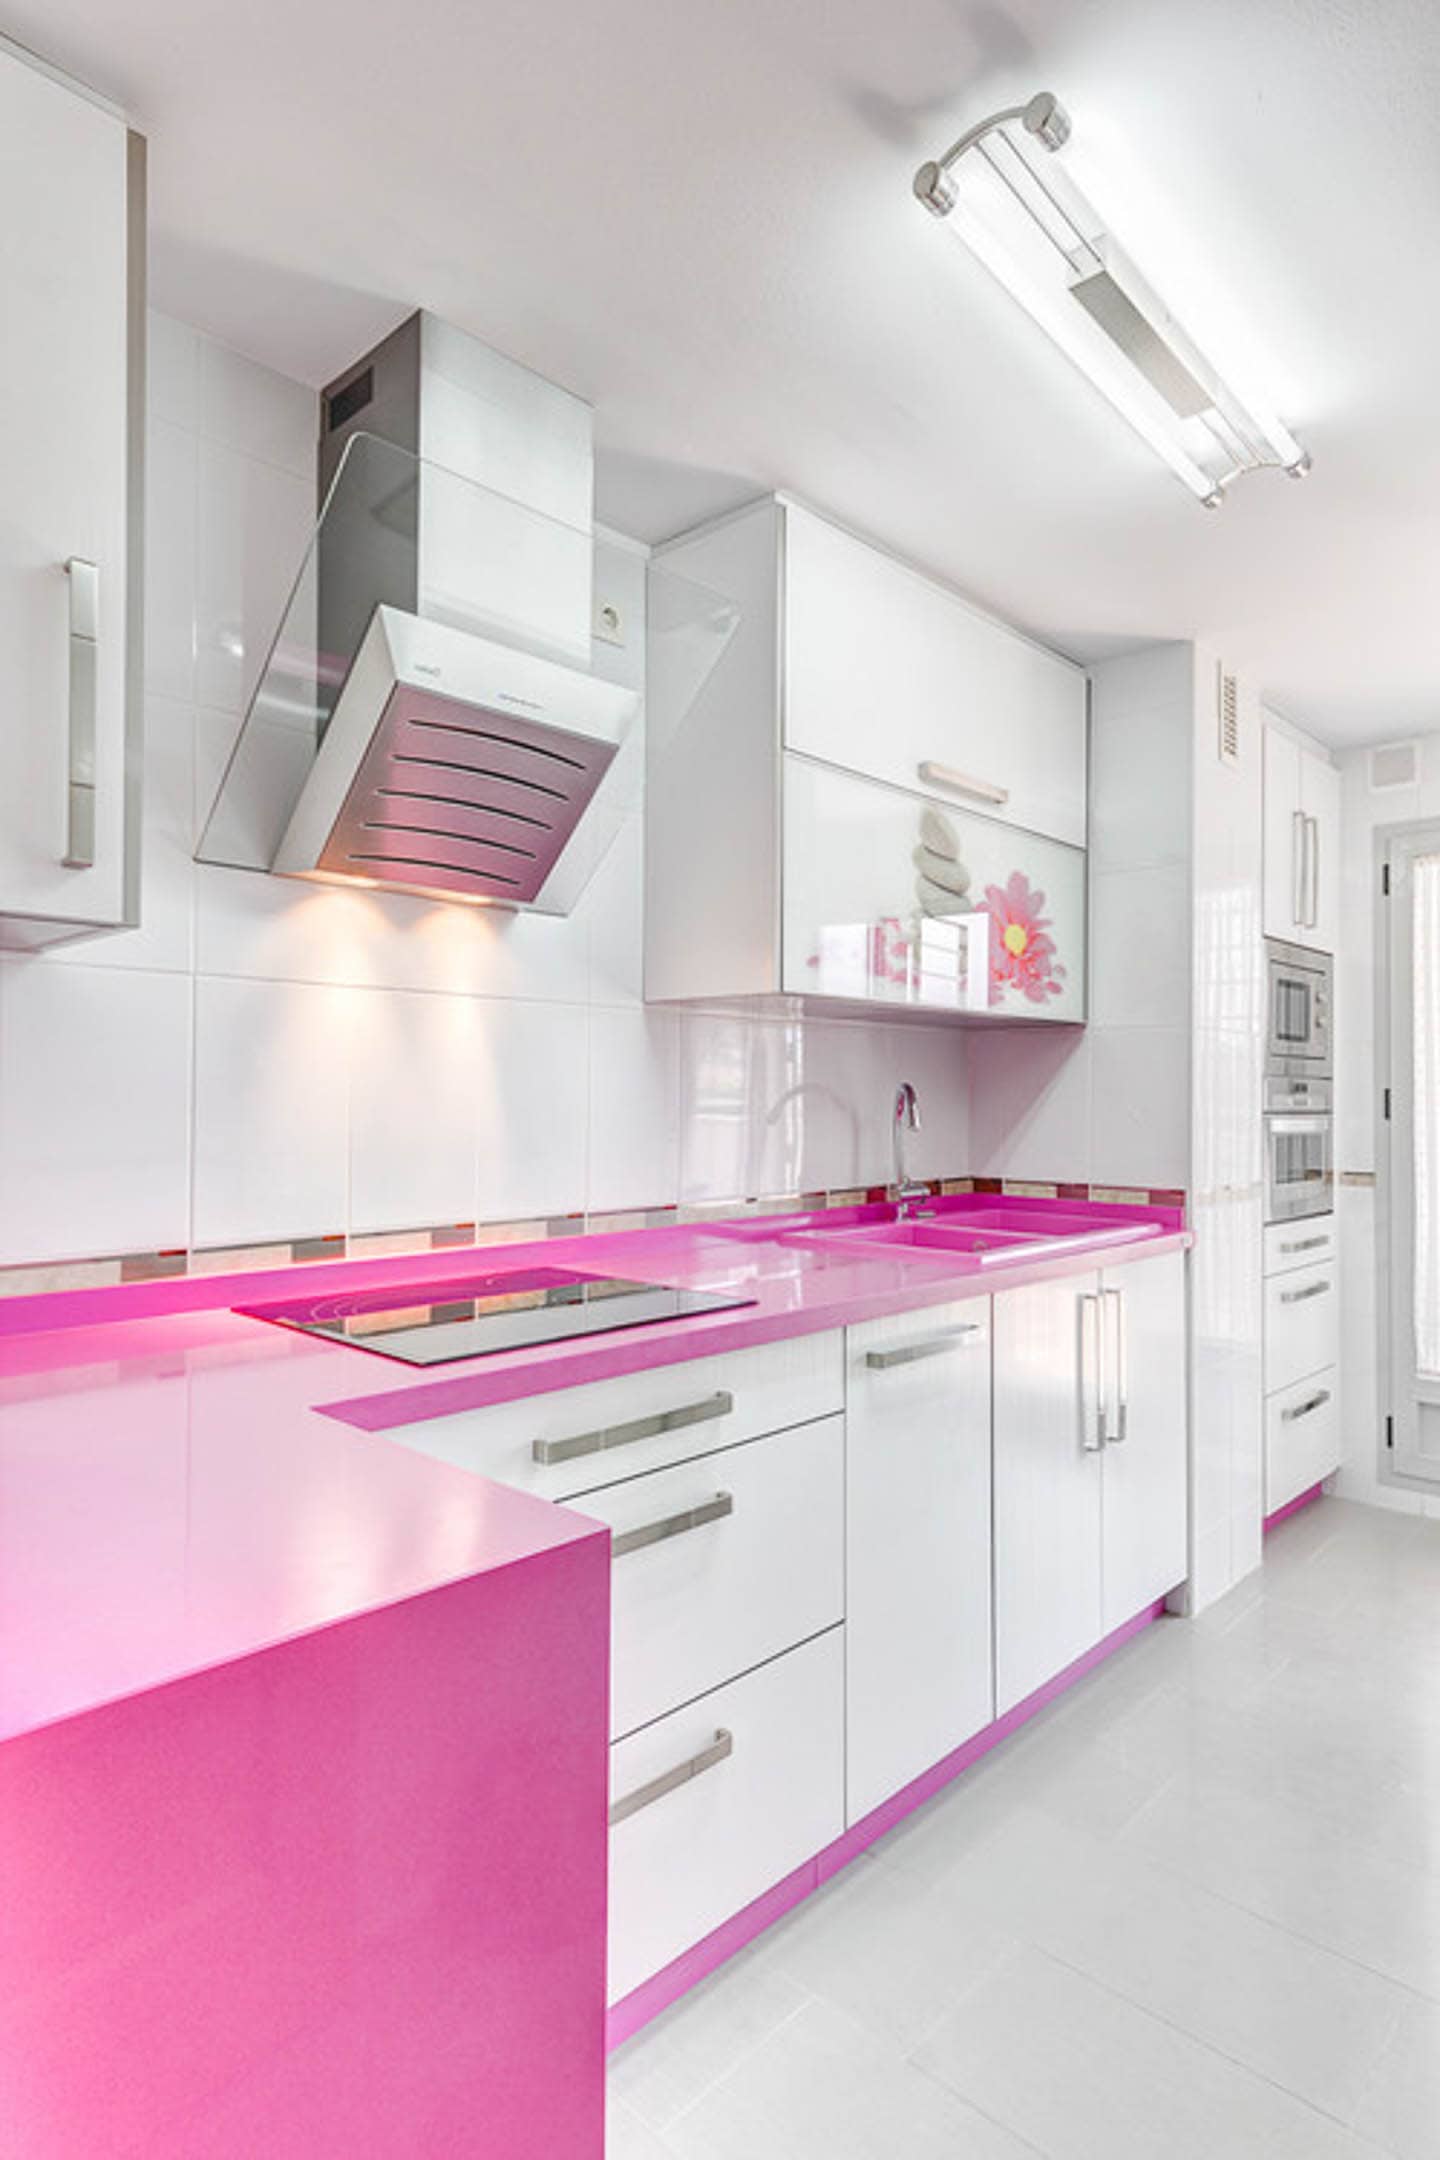 Sleek modern kitchen with white cabinets and a bright pink countertop